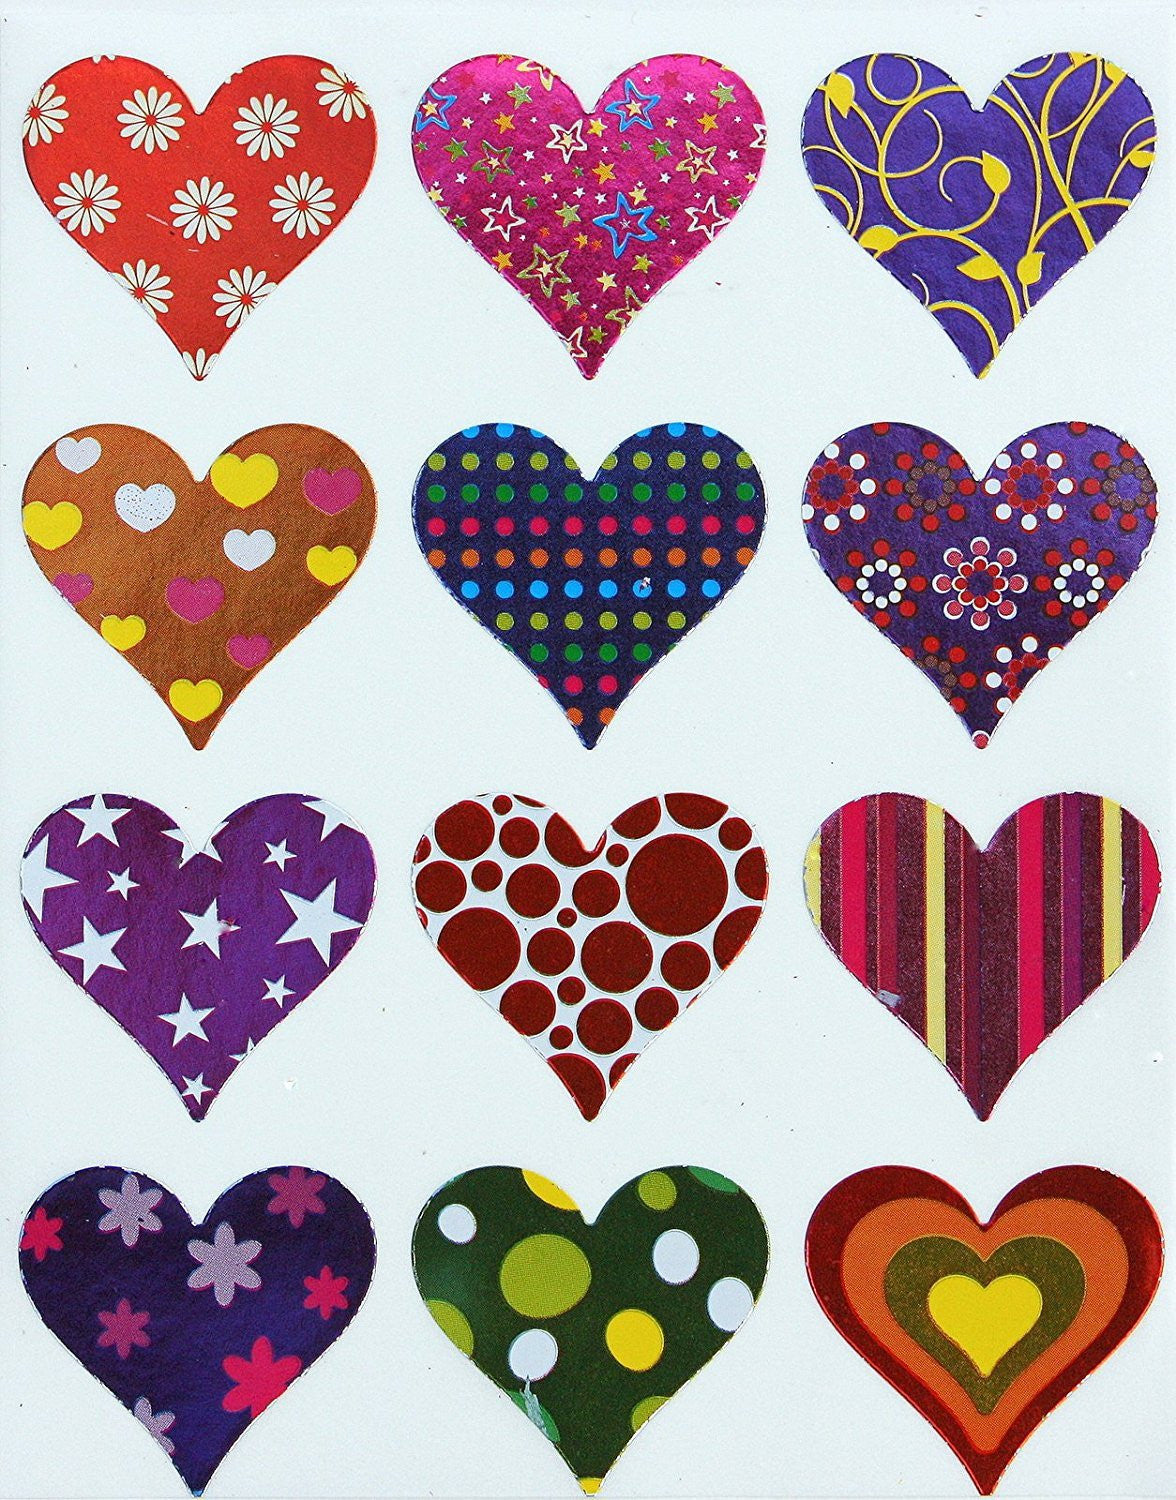 Foam Hearts For Valentine's Arts and Crafts Supplies, DIY (6 x 5 x 3 In, 2  Pack)